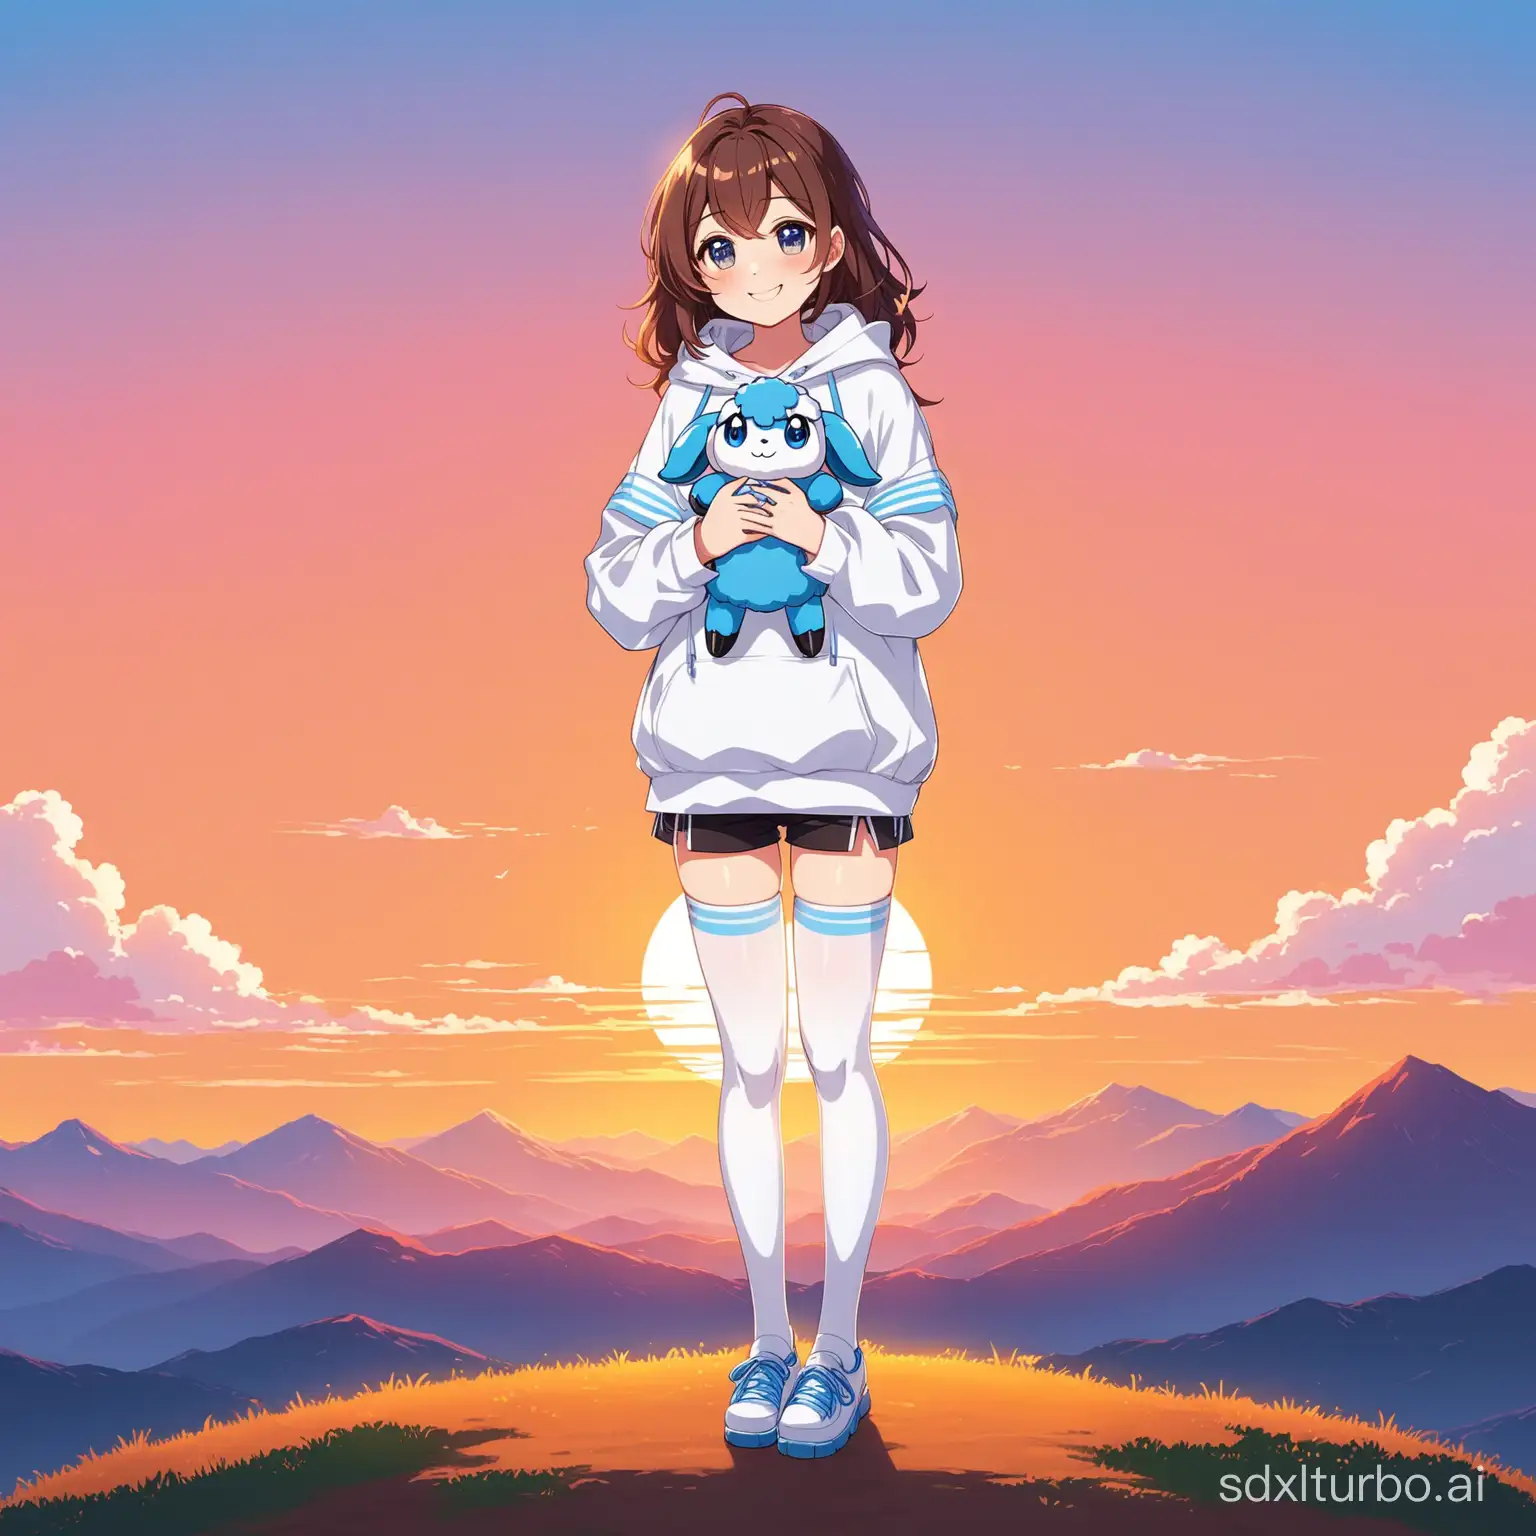 full body in frame. adult femboy, brown hair, wearing a white hoodie and thighhighs, Standing alone in front of a summer mountain while holding a fluffy blue ram plushie. All smiling. Pink and orange sunset in background.